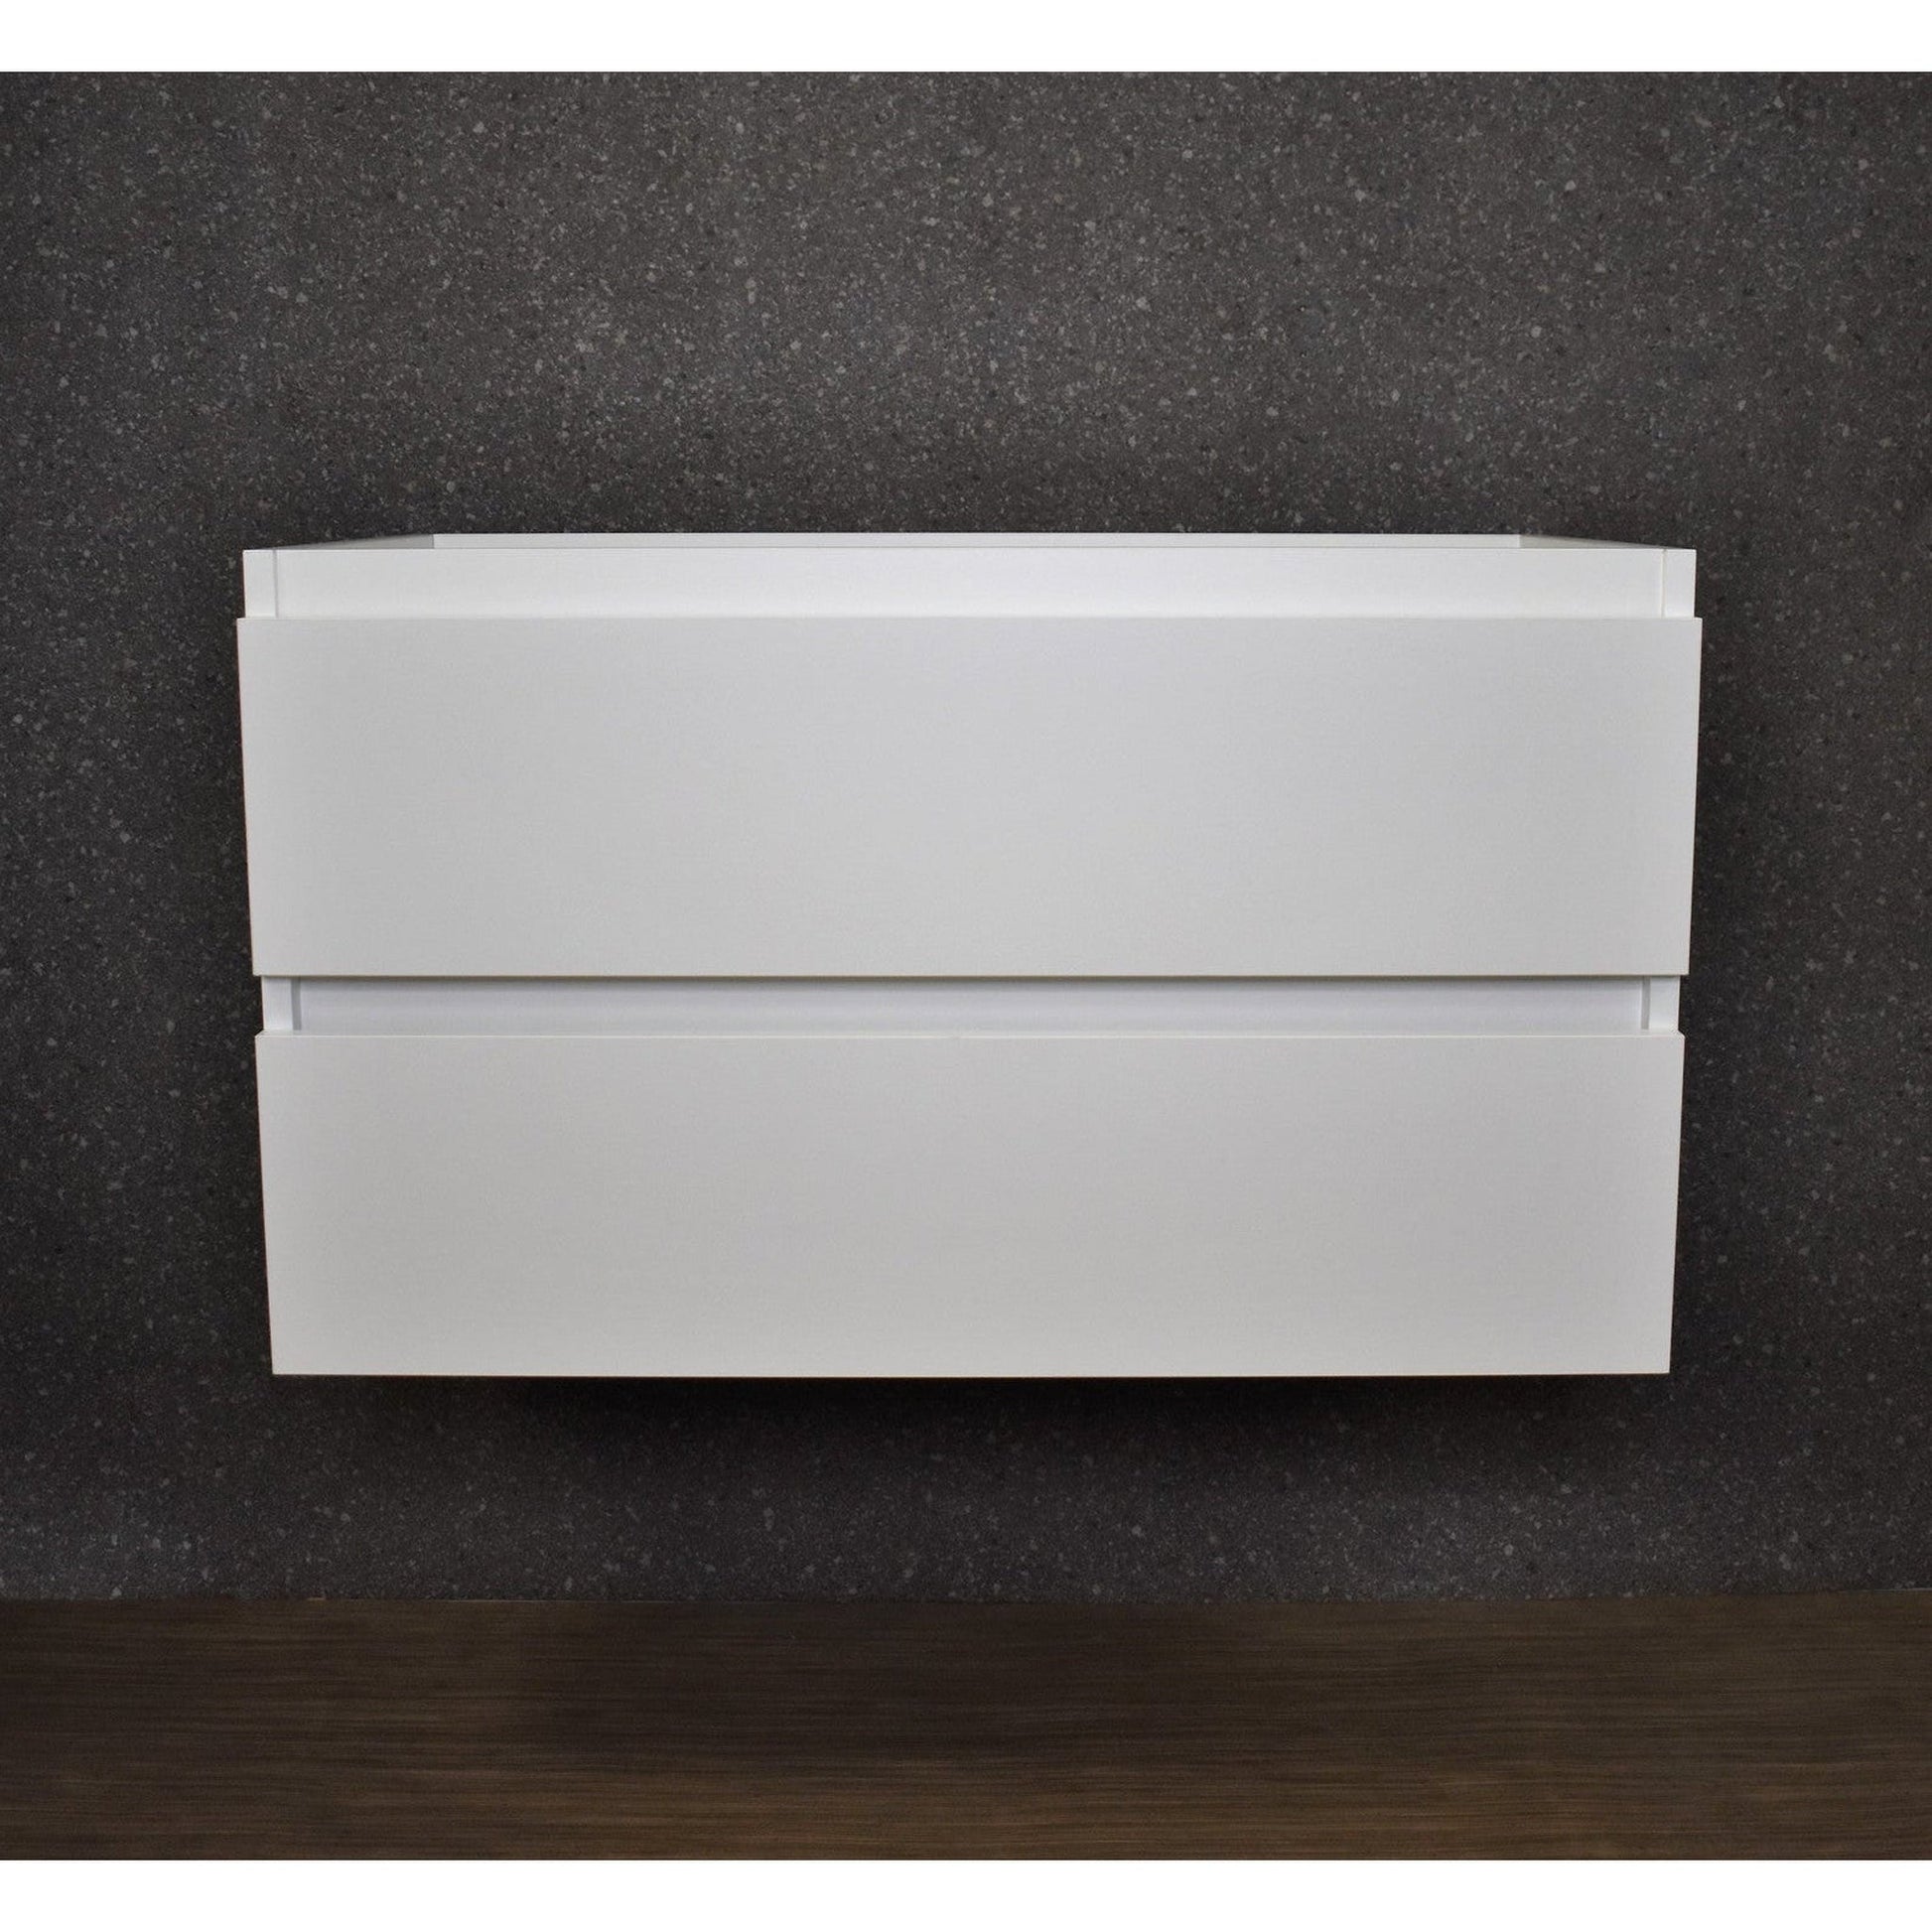 Volpa USA Salt 36" x 18" White Wall-Mounted Floating Bathroom Vanity Cabinet with Drawers